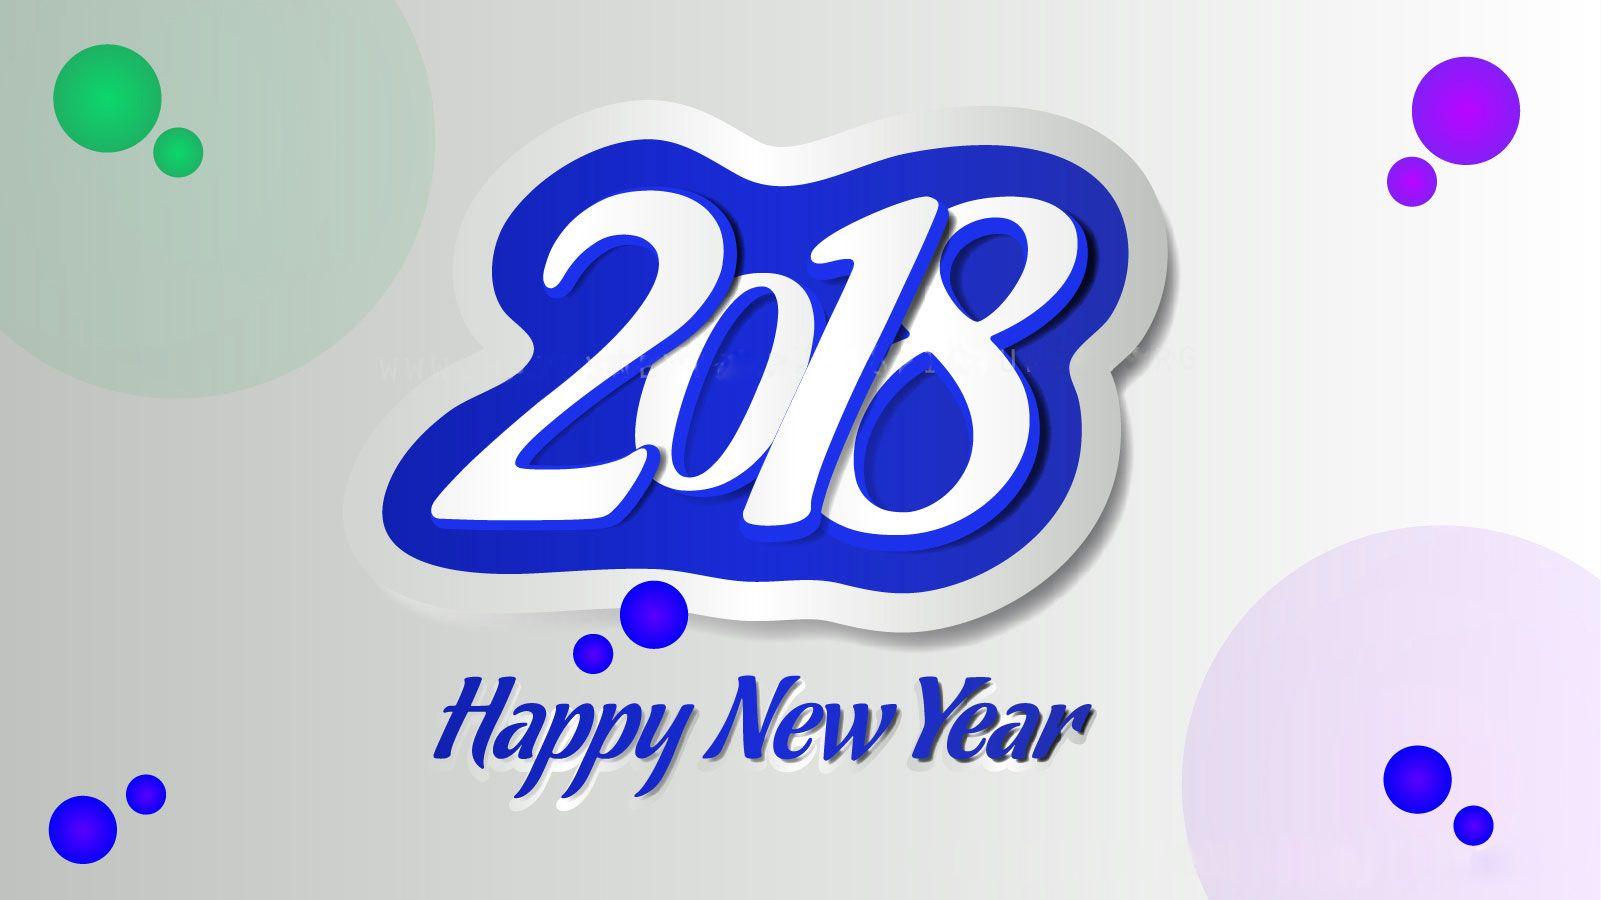 Happy New Year 2018 Image New Year HD Wallpaper